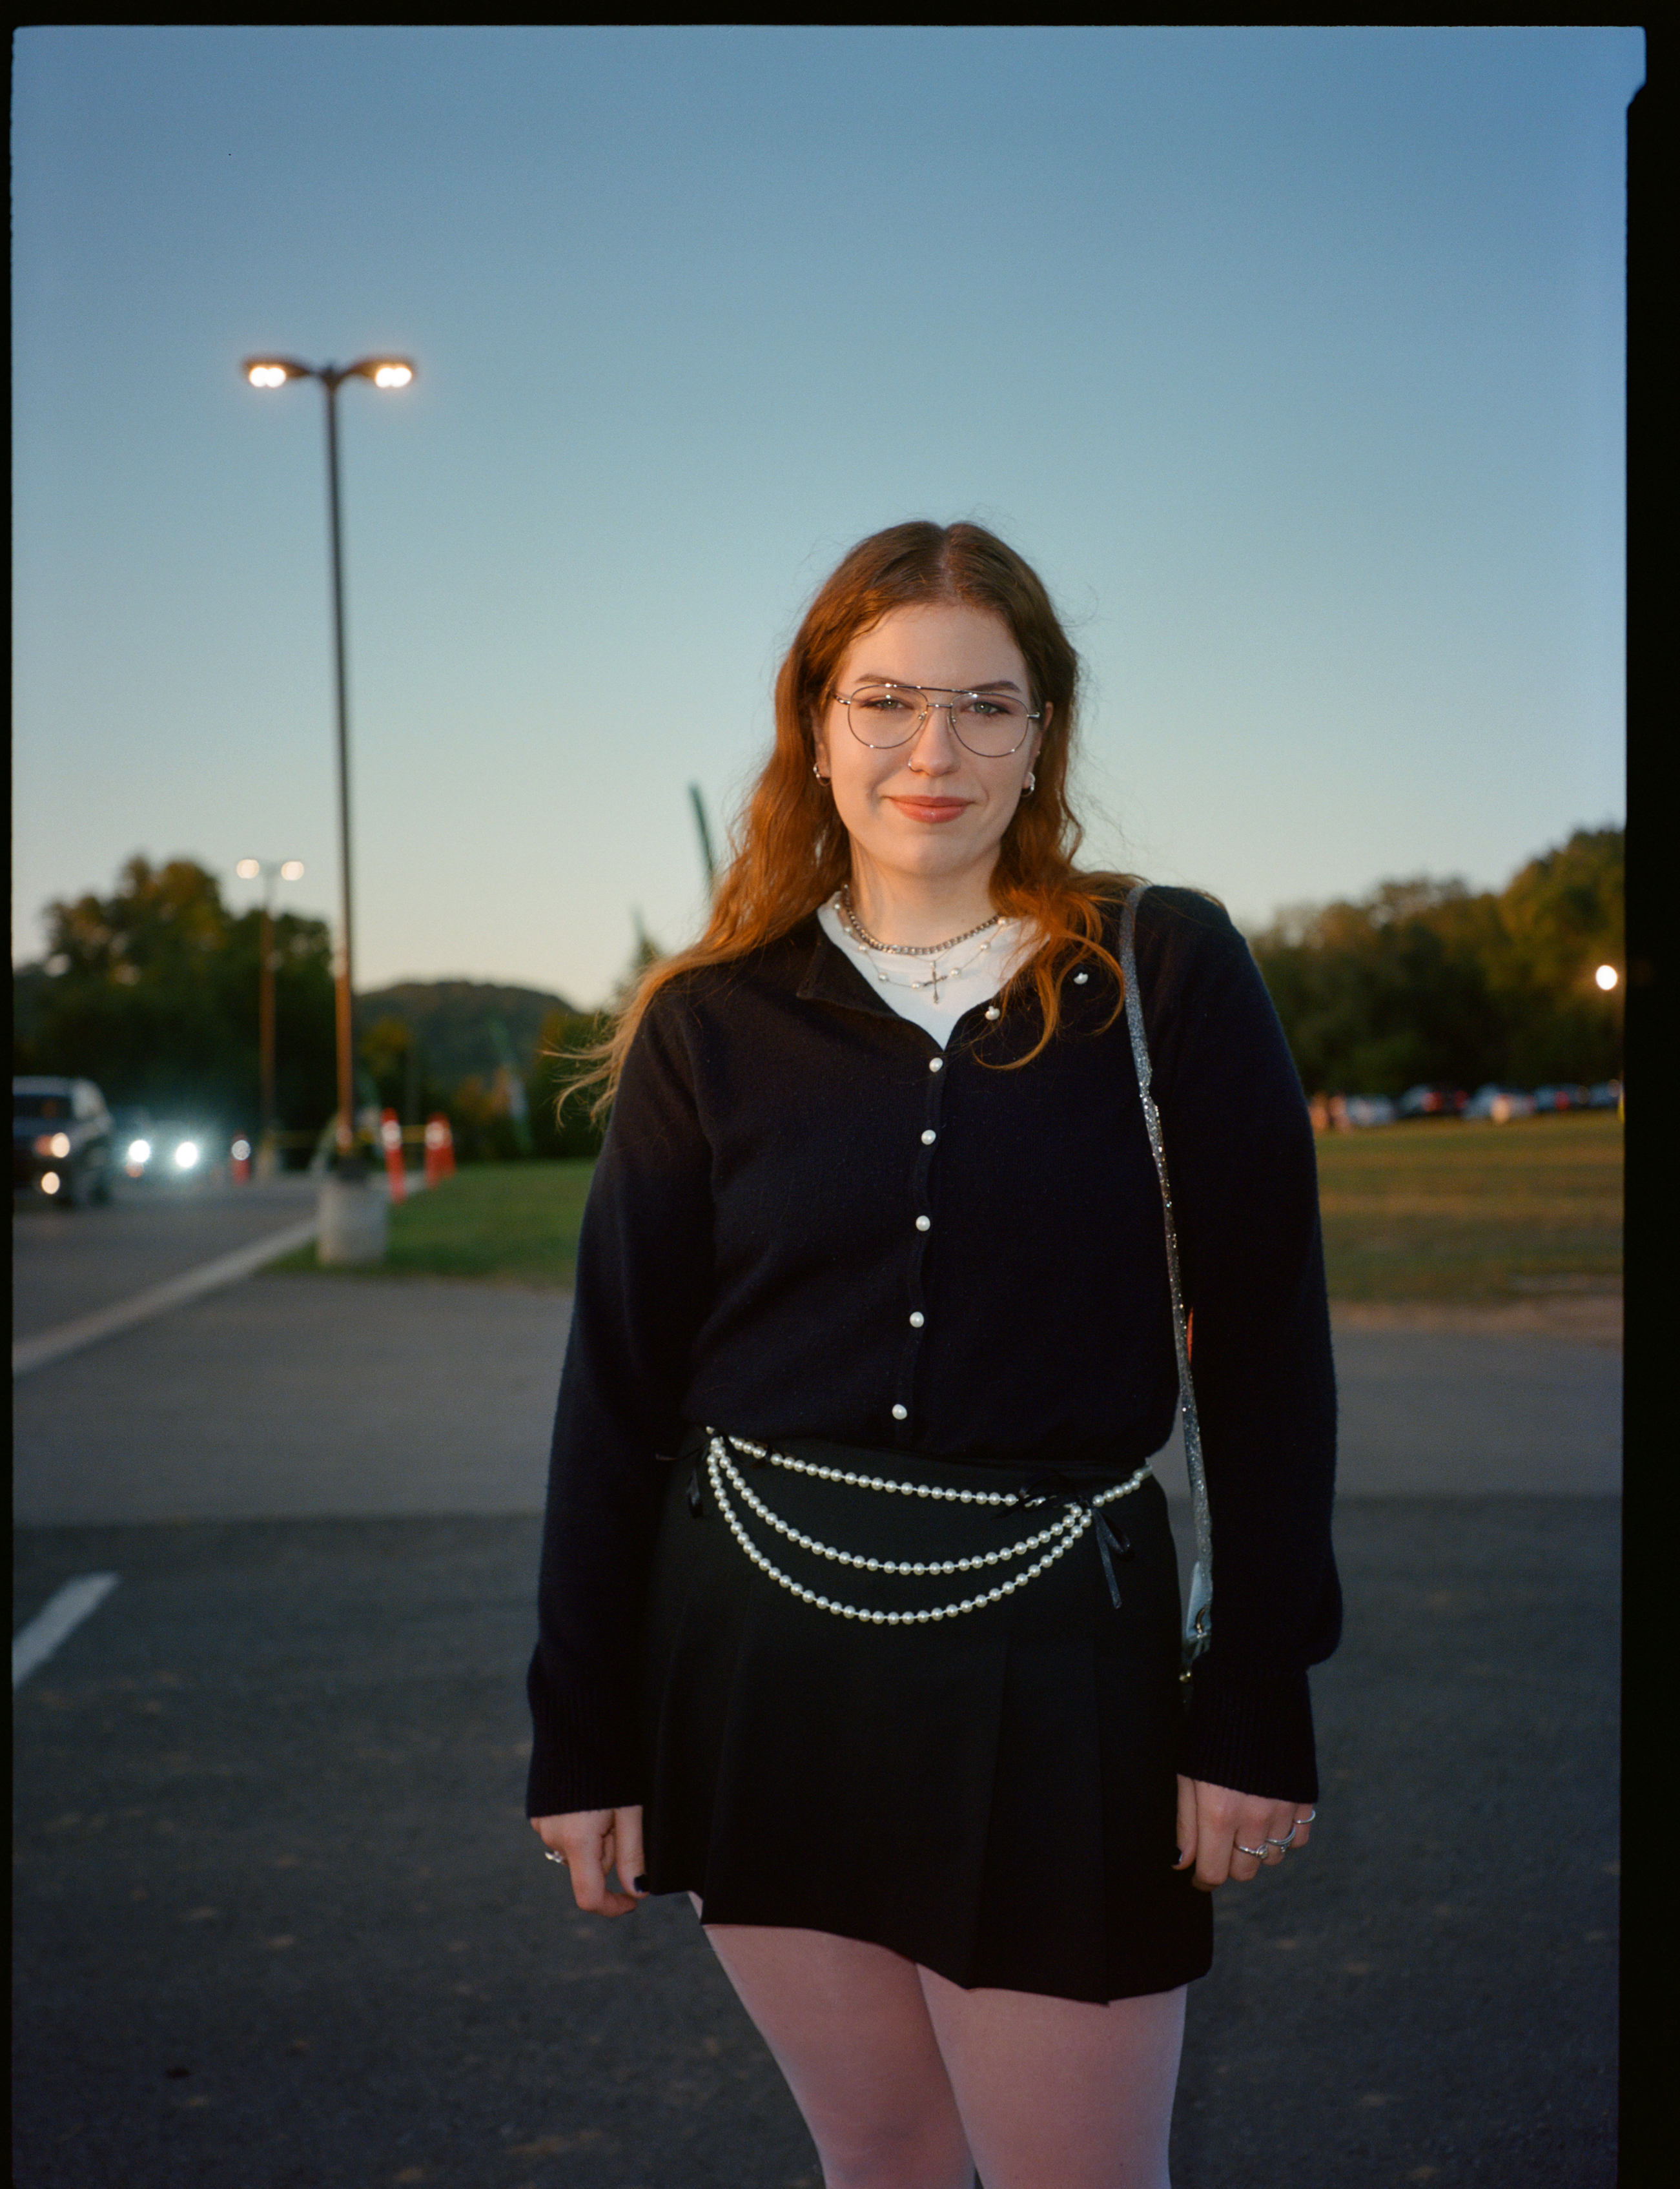 a lana del rey stan stands in a car part. she has long auburn hair and framed glasses. she wears a black cardigan and black skirt with a belt made of pearls